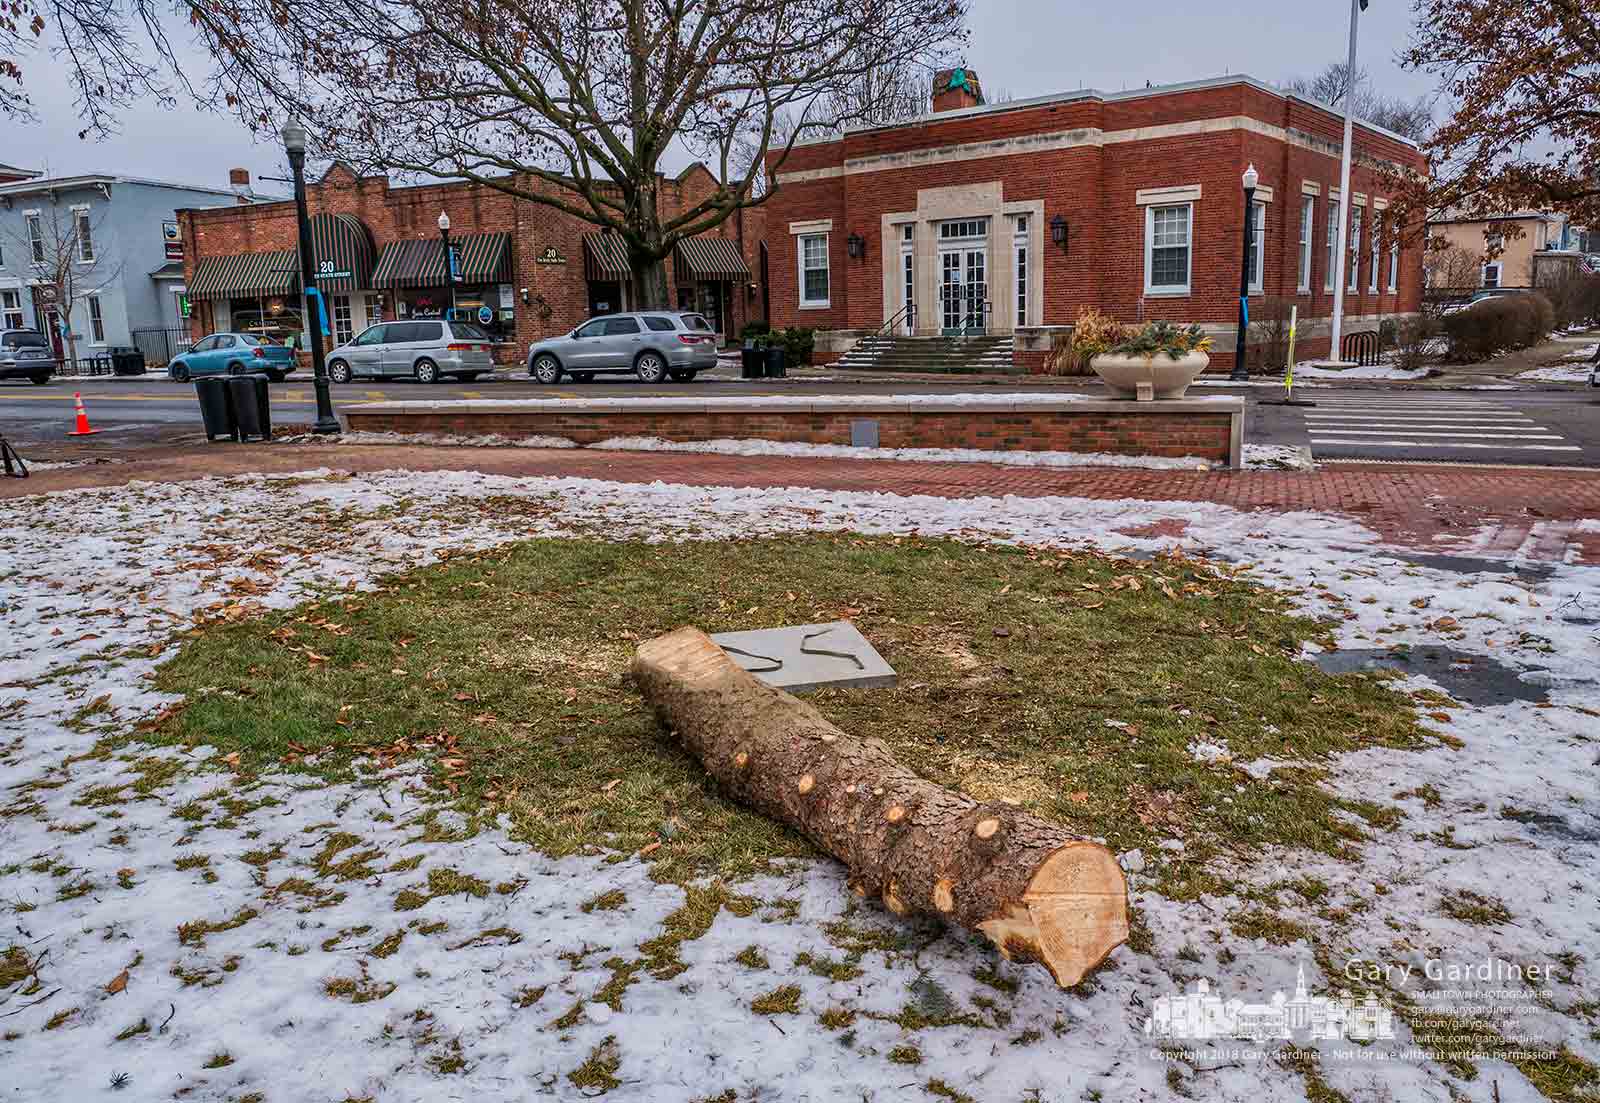 The six-foot-long stump of the holiday tree at city hall lies on the courtyard waiting to be hauled away to be recycled as the city completes returning the greenspace to its normal configuration. My Final Photo for Jan. 9, 2018.